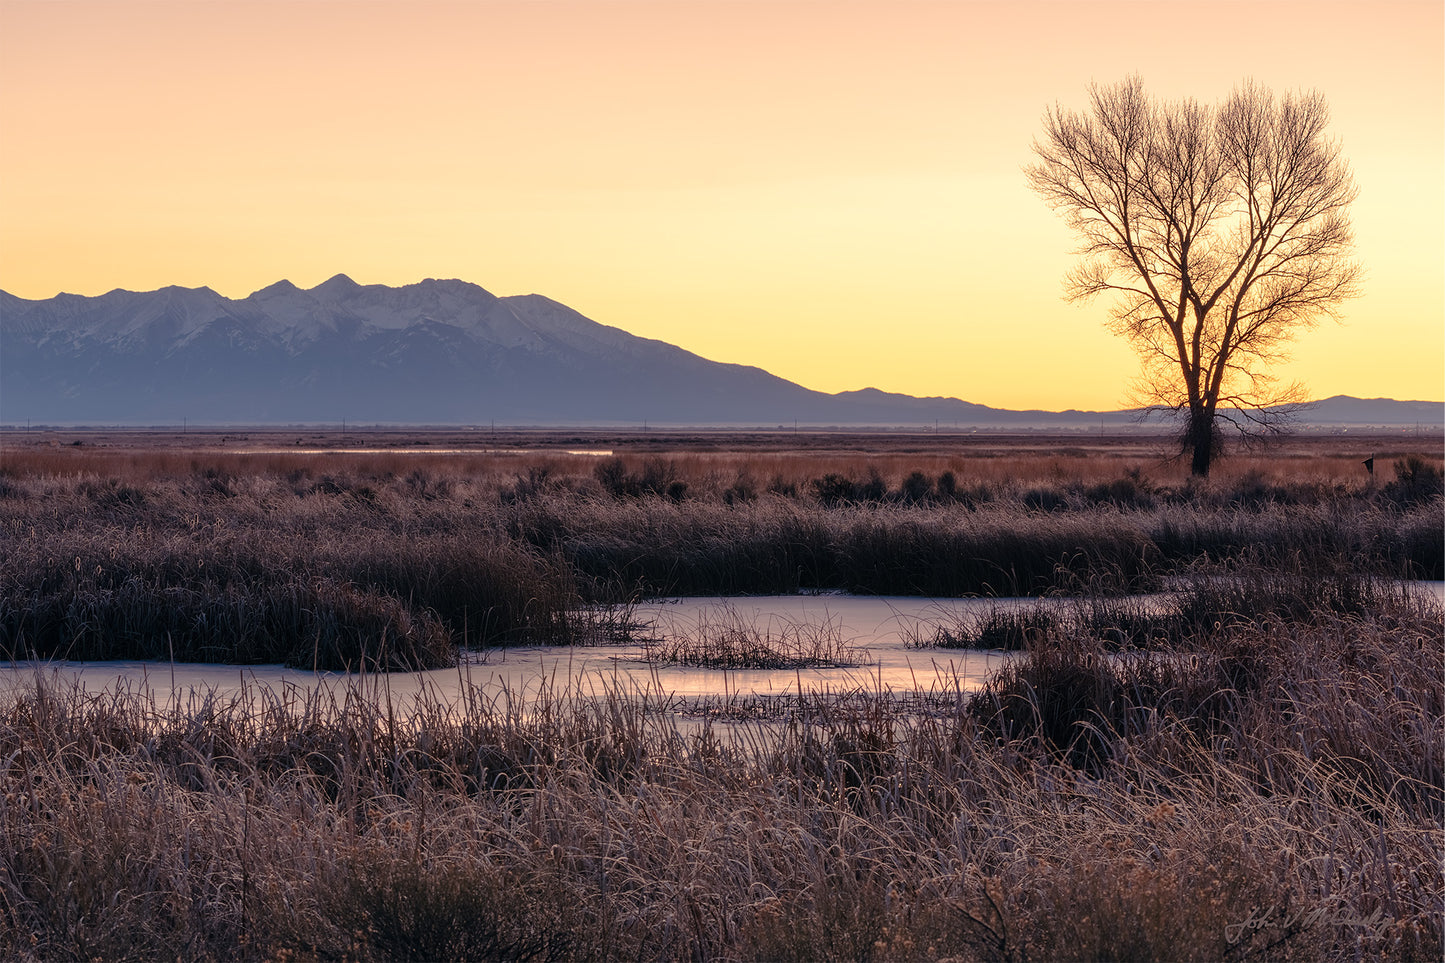 The golden light of a pre-dawn sky spreads a special light in this fine art print. Here it silhouettes distant blue mountains and a lone tree while highlighting the frost on the grasses and rushes.